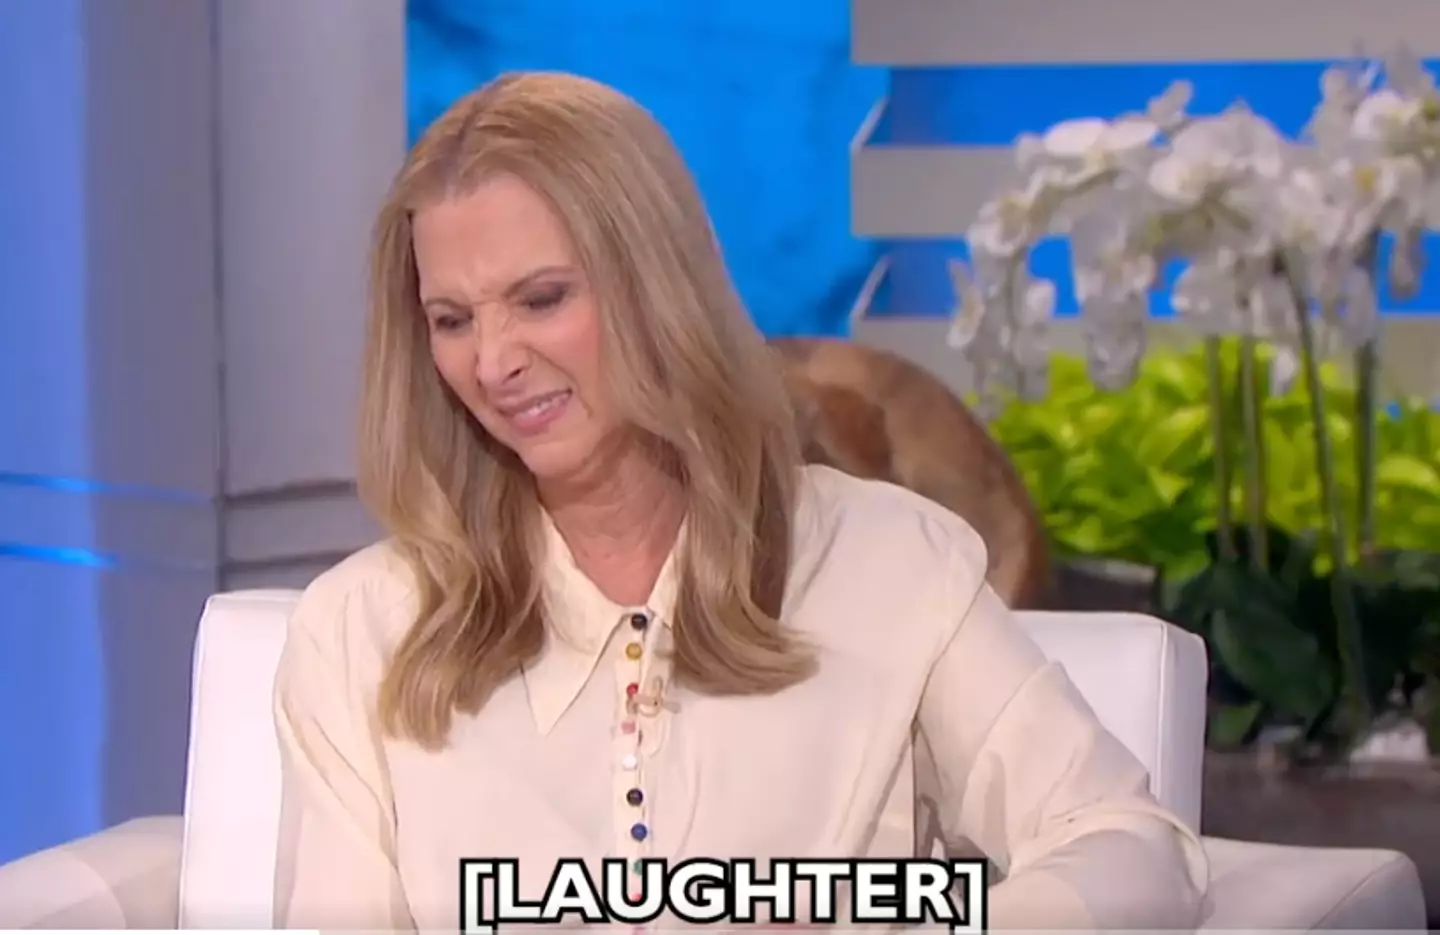 Lisa Kudrow on The Ellen DeGeneres Show reflecting on who she'd 'do anything' for.